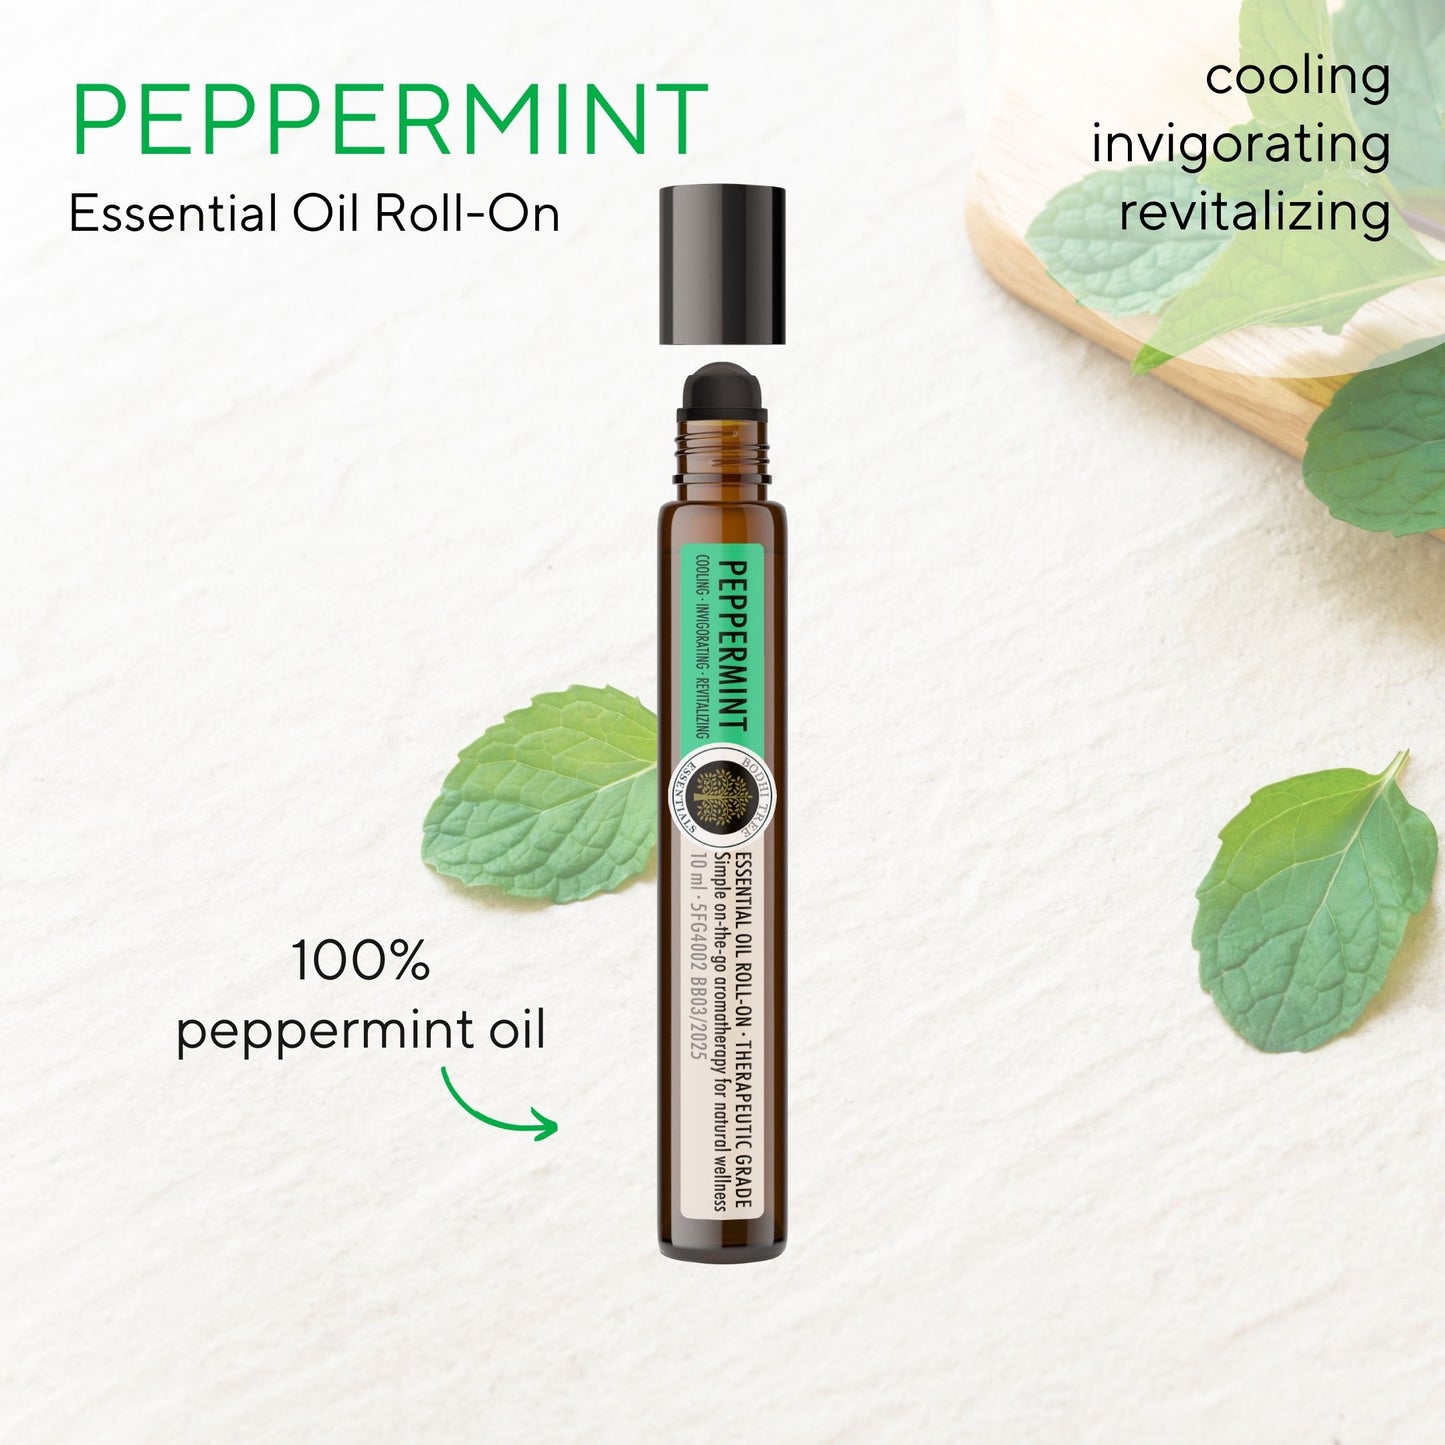 Bodhi Tree Essential Oil Roll-On Peppermint